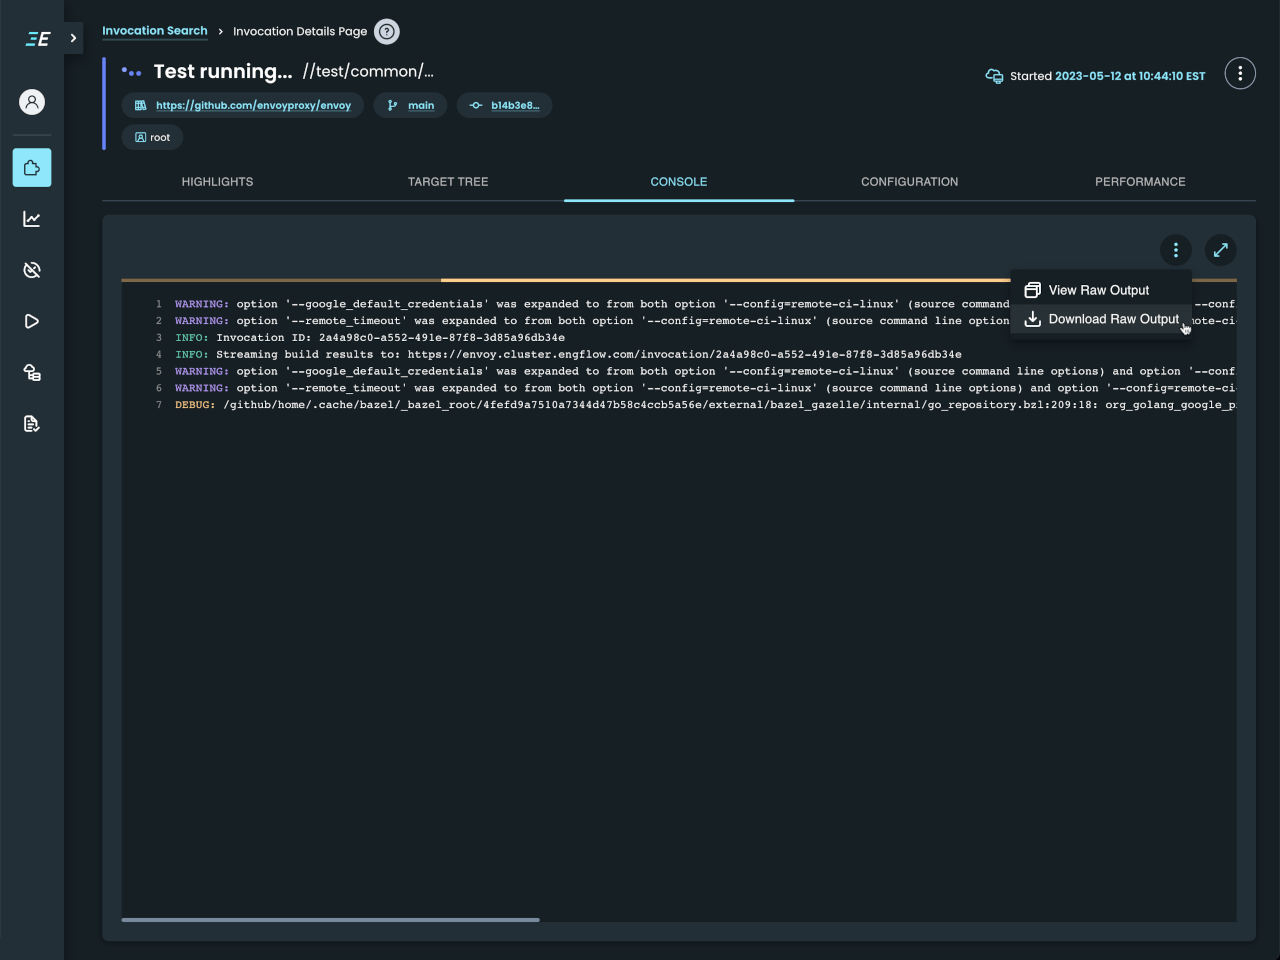 Build and Test UI: Live-streamed console output for an invocation (dark mode)